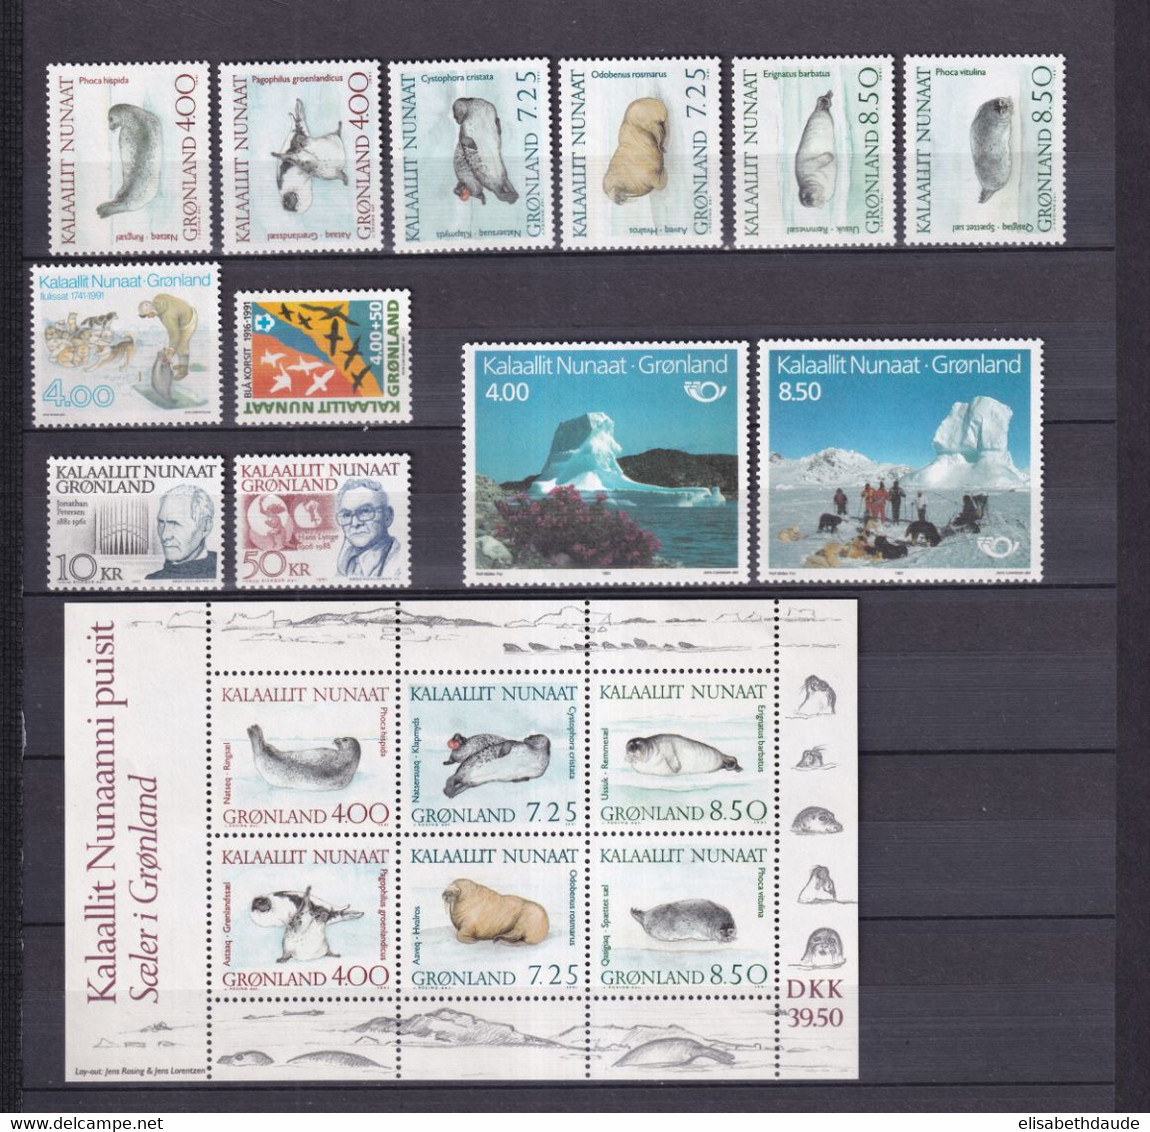 GROENLAND - ANNEE COMPLETE 1991 - YVERT N°199/210 + BF3 ** MNH - COTE = 91.5 EUR - - Annate Complete